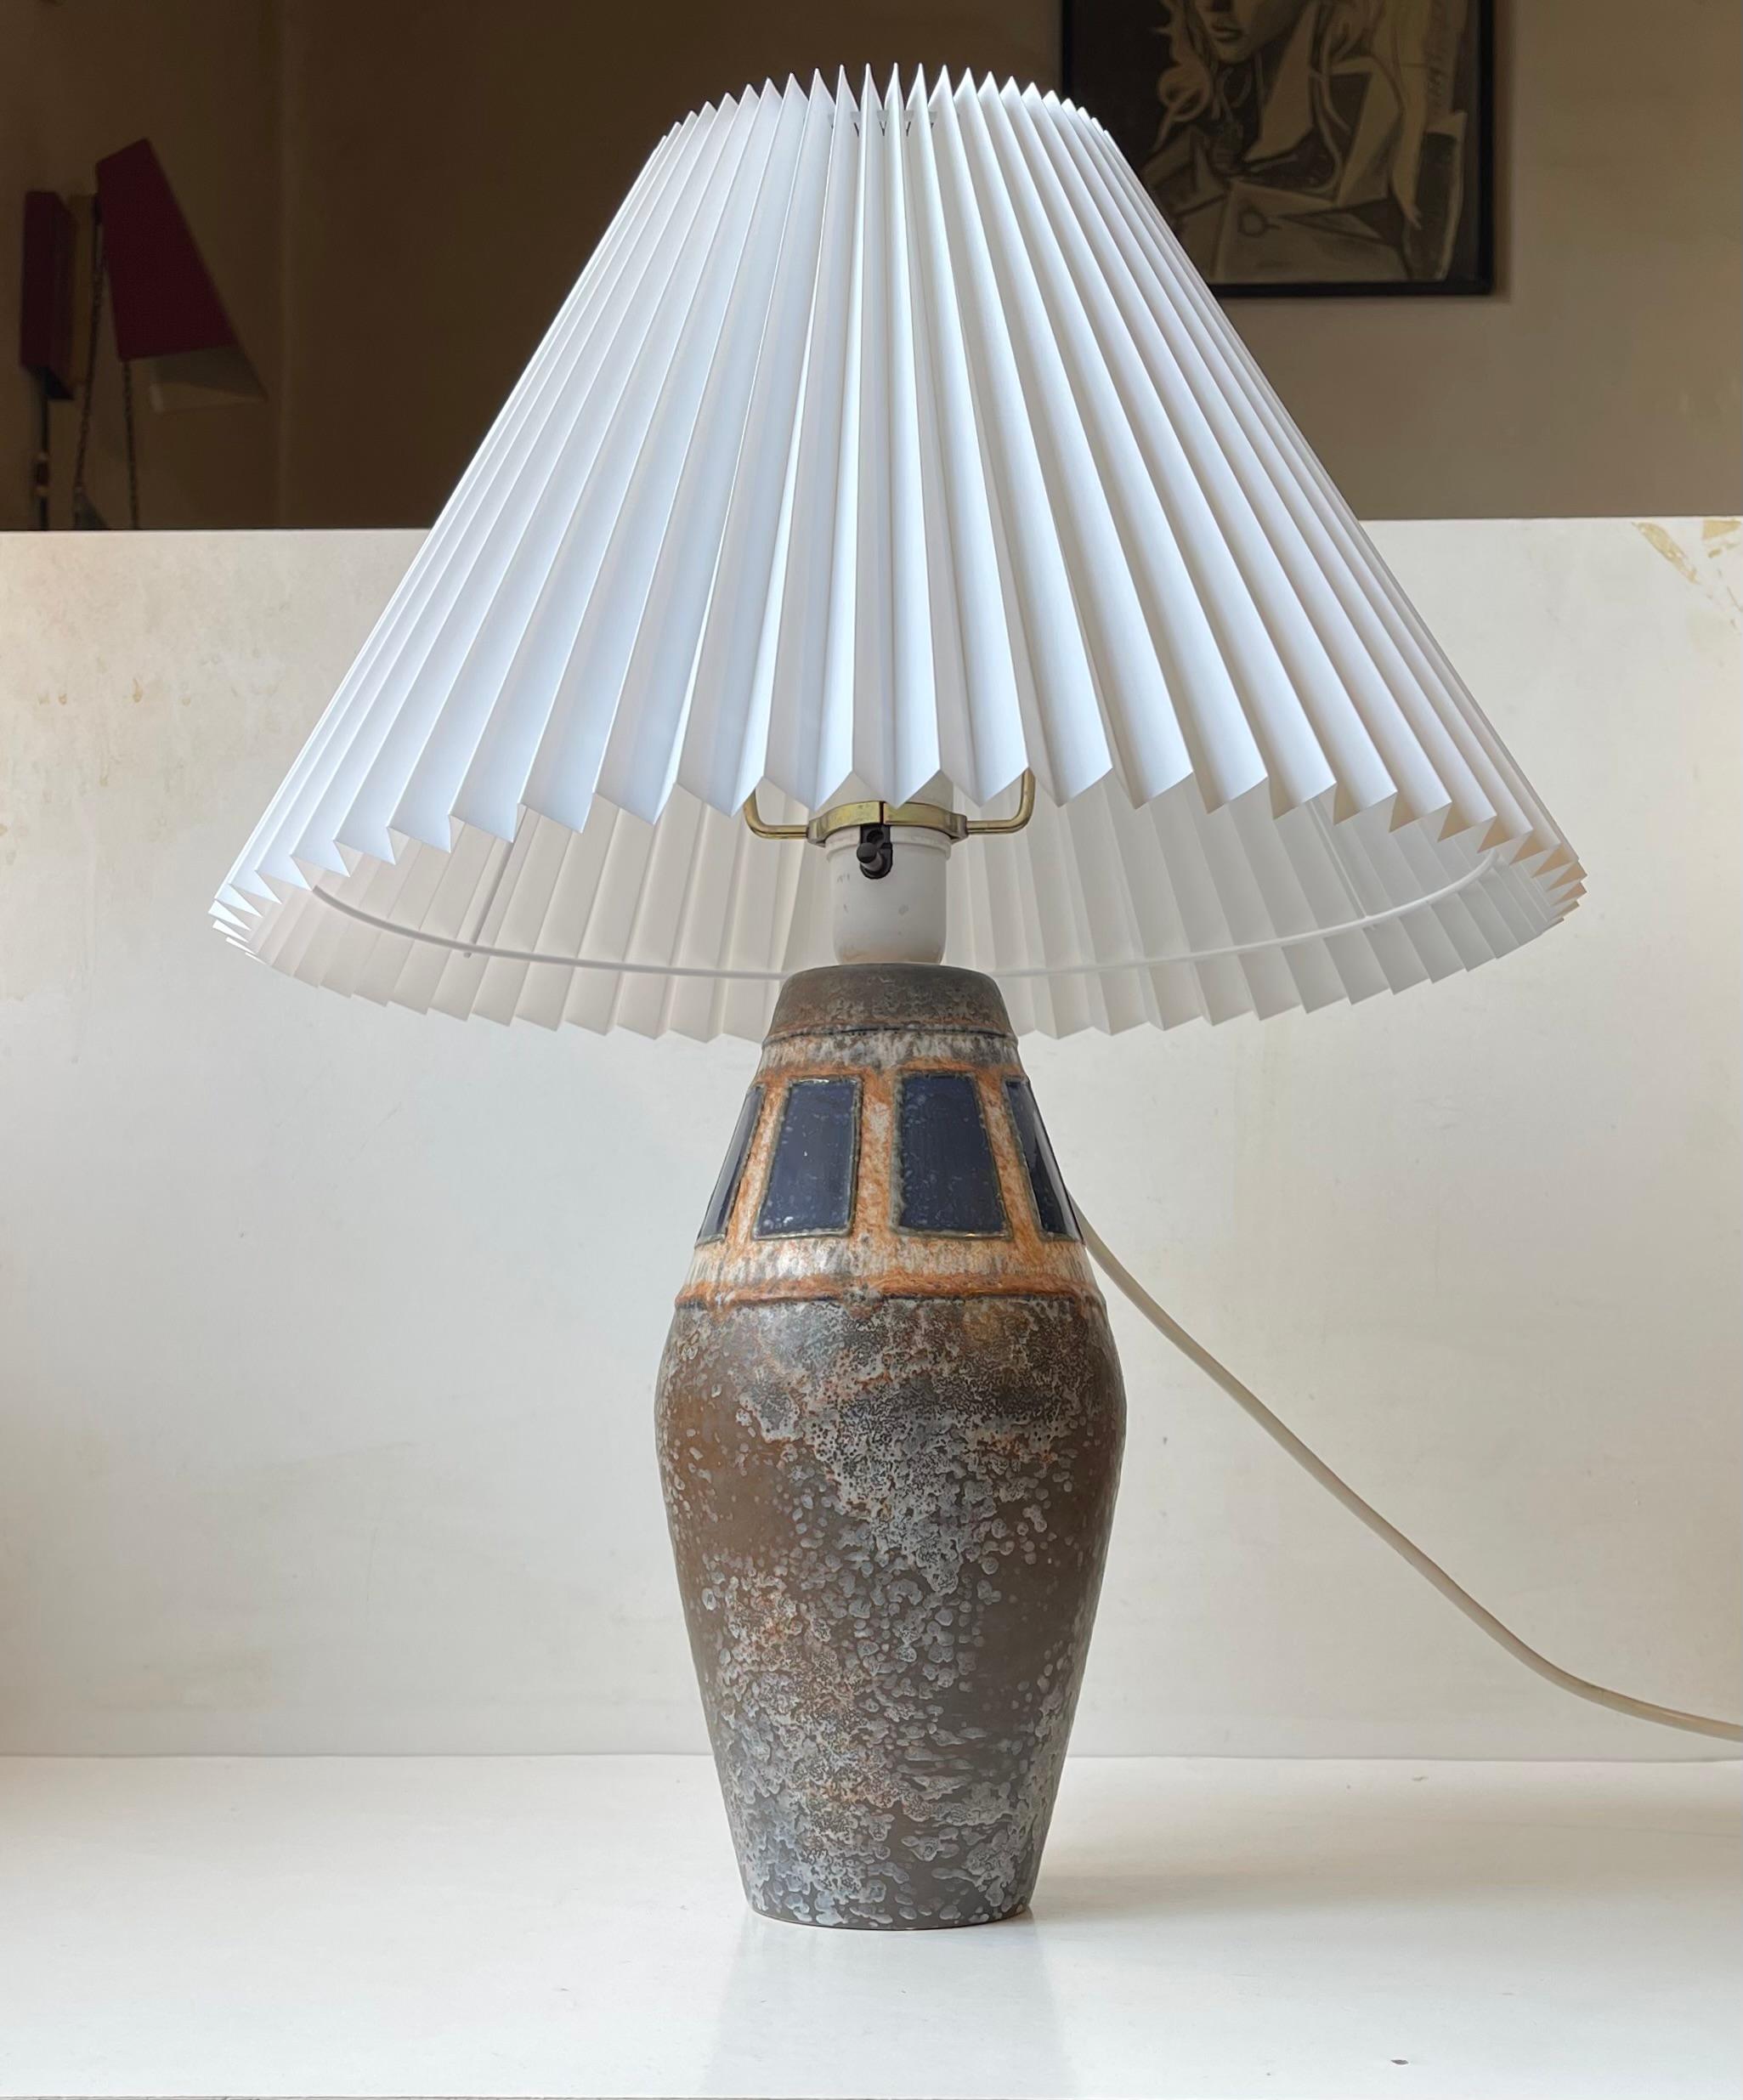 Large pottery table lamp decorated with spotted earthy ash glazes and blue squares. Marked Western Germany 27 beneath its base. It comes with a new white fluted Danish shade with a diameter of 38 cm. The total height of the lamp is 50 cm (can be